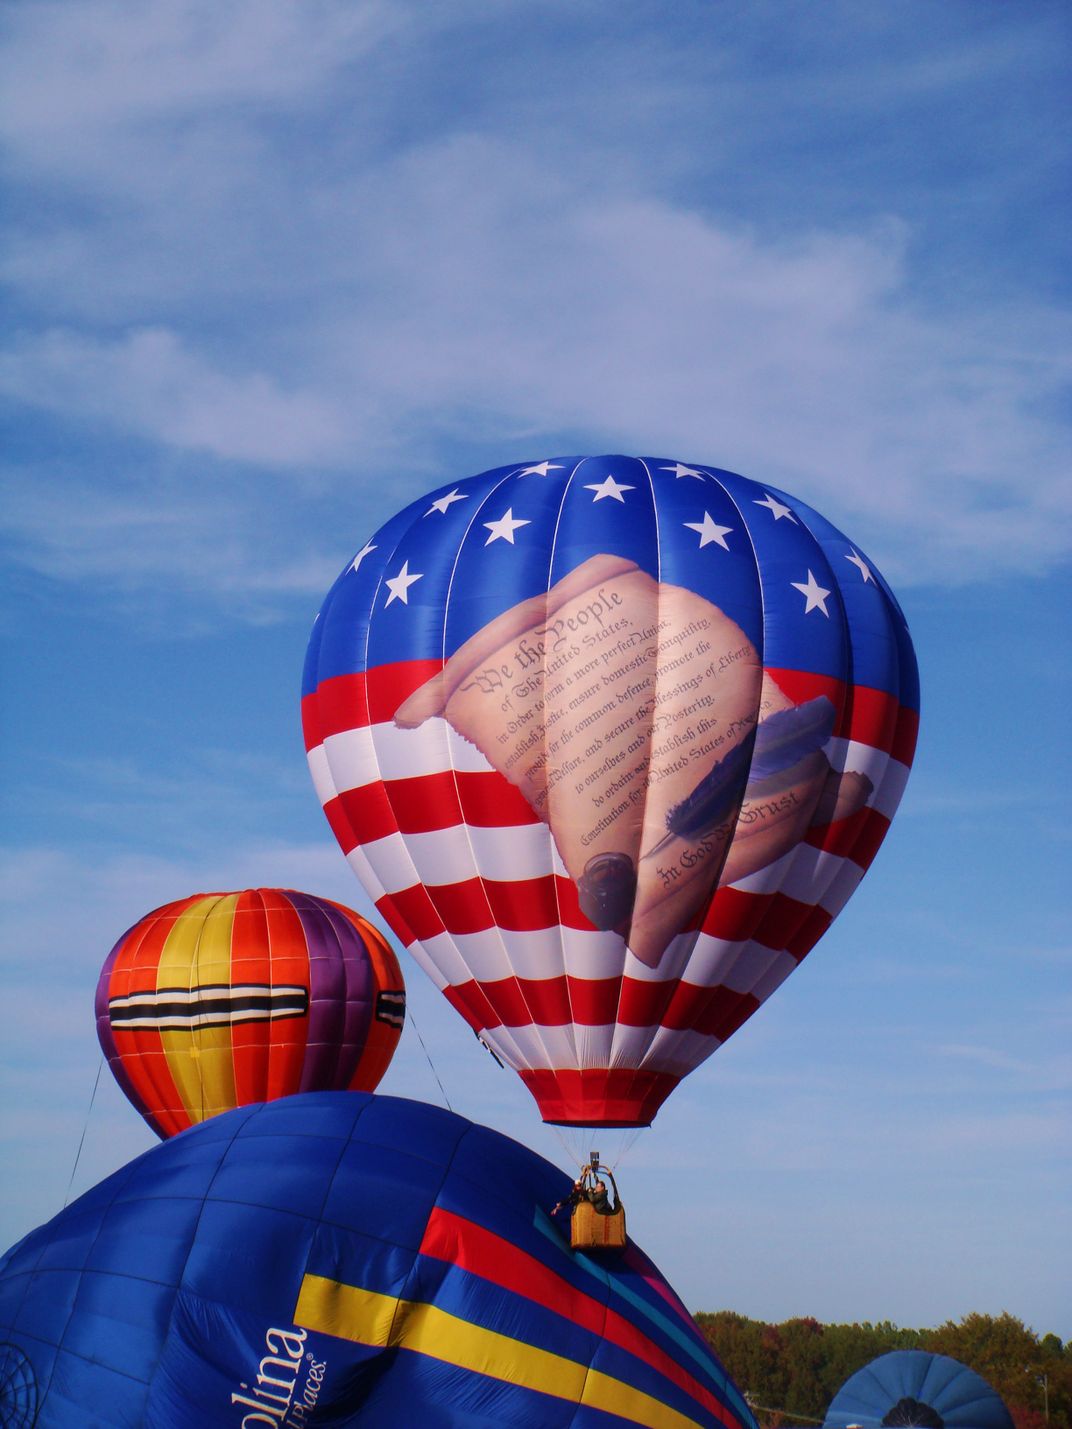 Balloons over Anderson, SC balloon rally. The crowd cheers as the